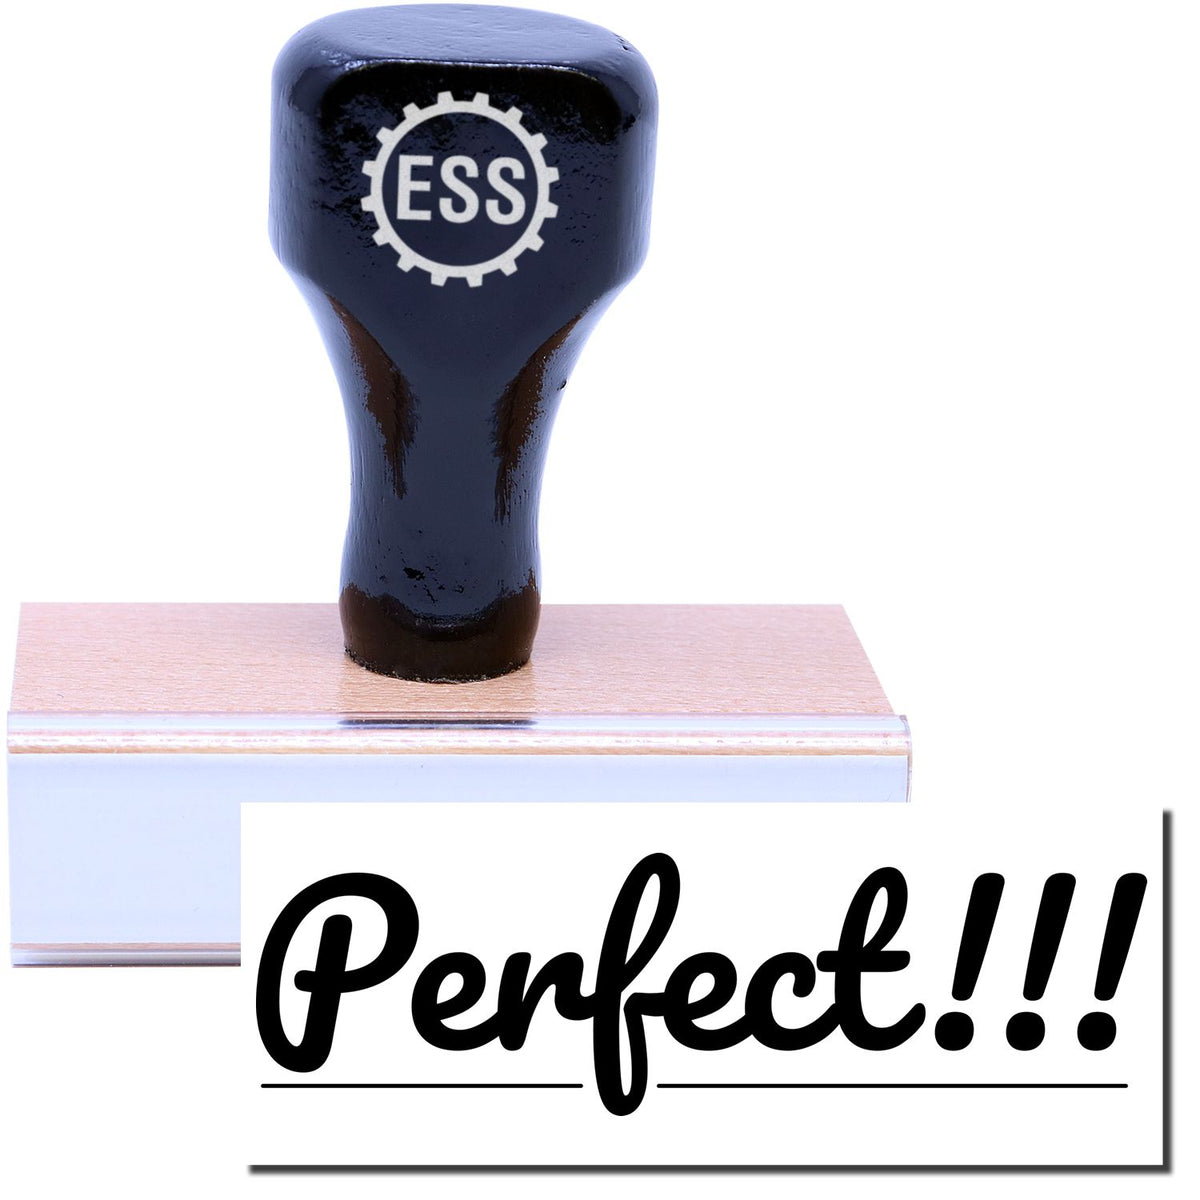 A stock office rubber stamp with a stamped image showing how the text &quot;Perfect!!!&quot; in a large cursive bold font with three exclamation signs at the end is displayed after stamping.